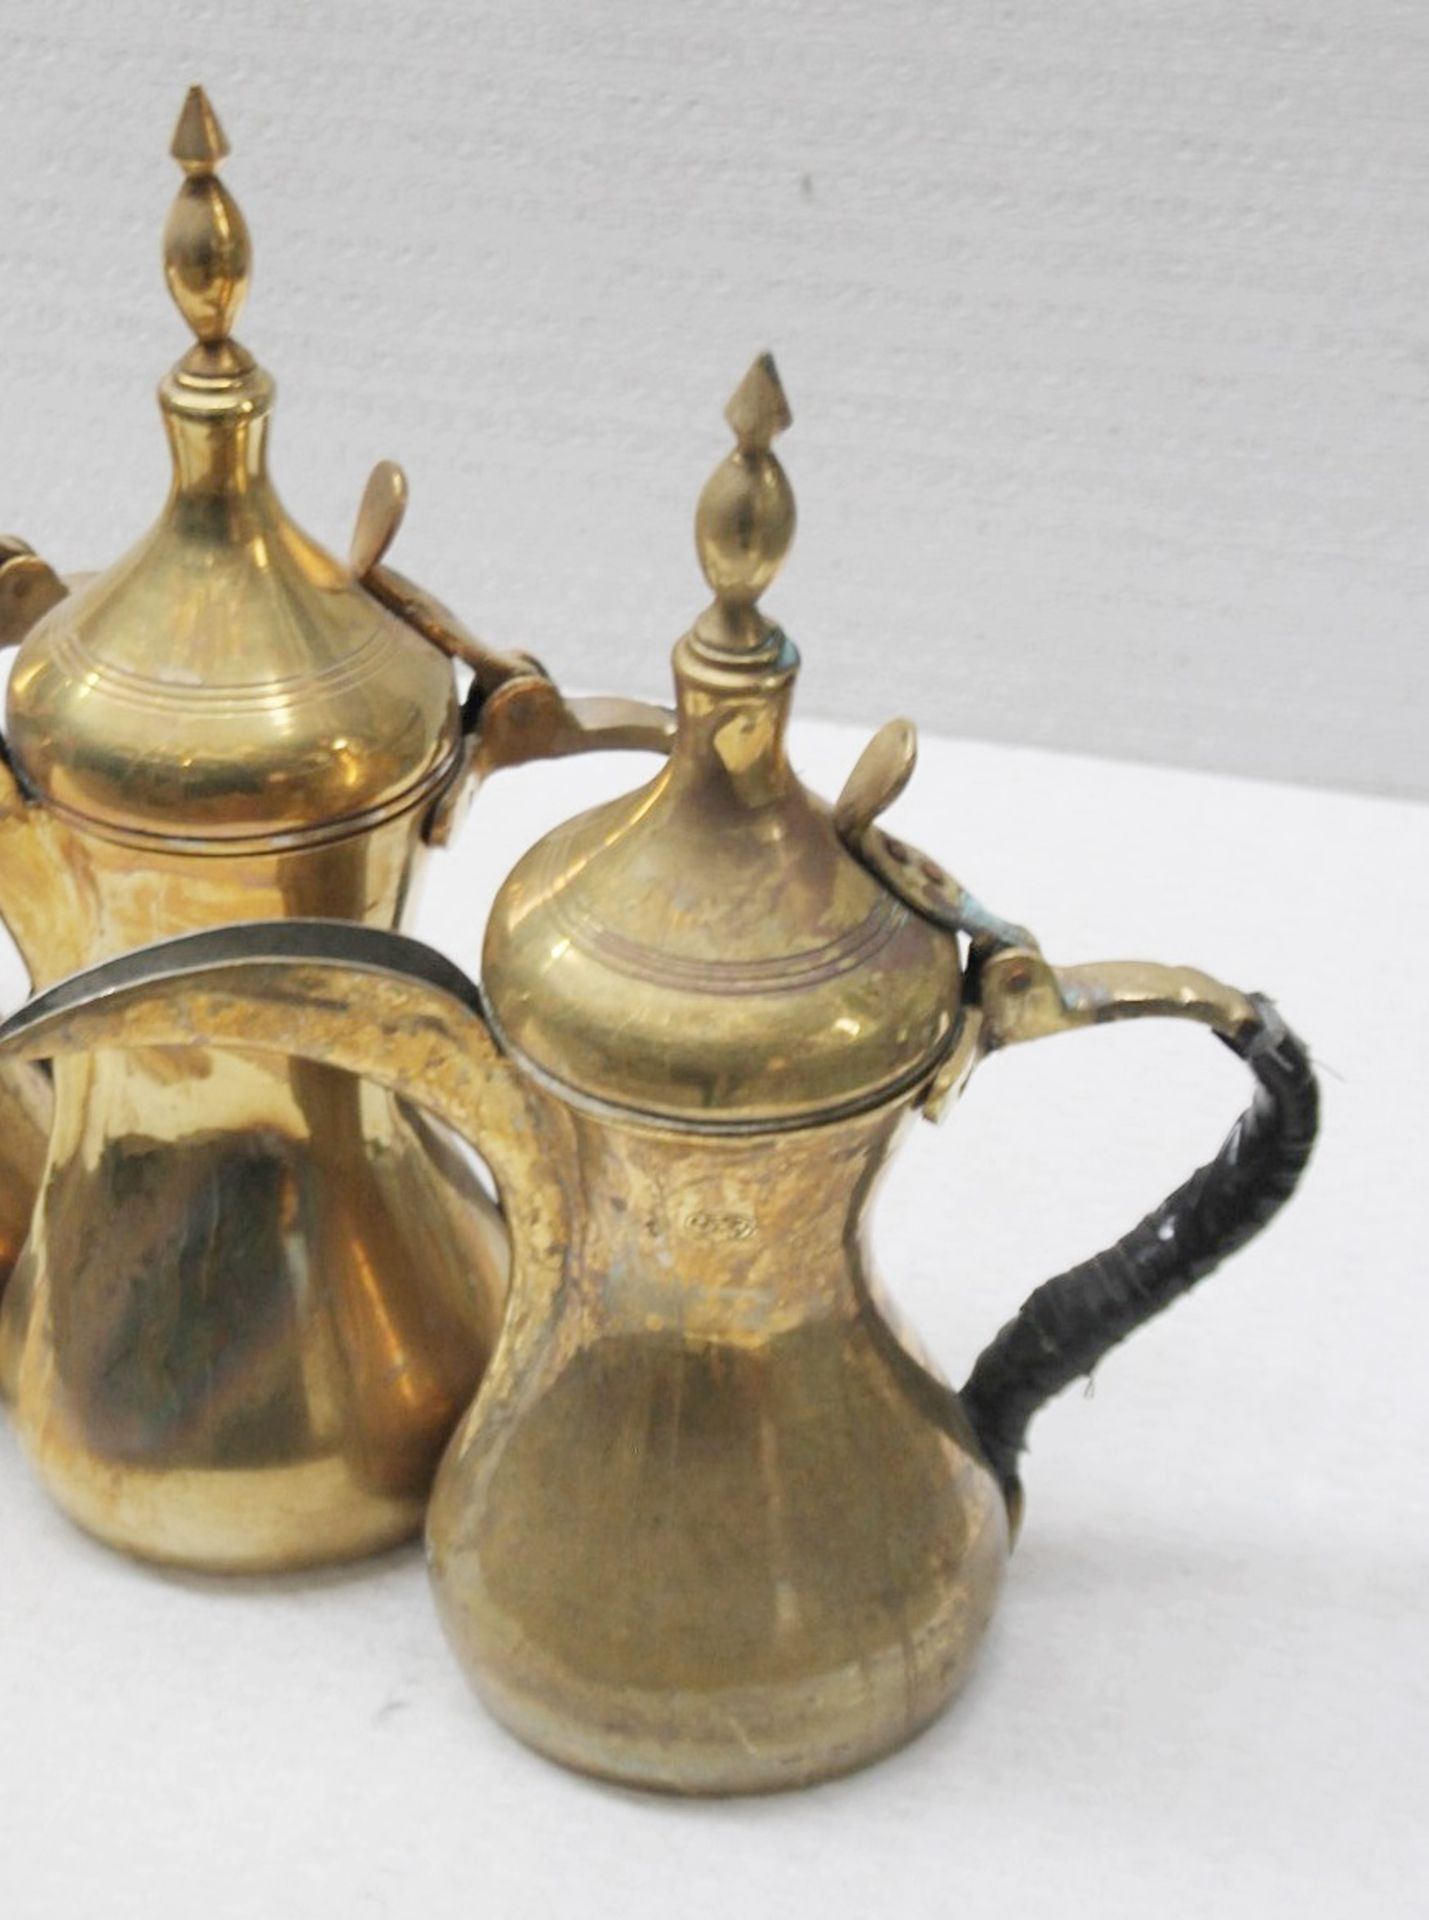 5 x Vintage Brass Arabic Dallah Coffee Pots - Recently Removed From A Well-known London Department - Image 5 of 5